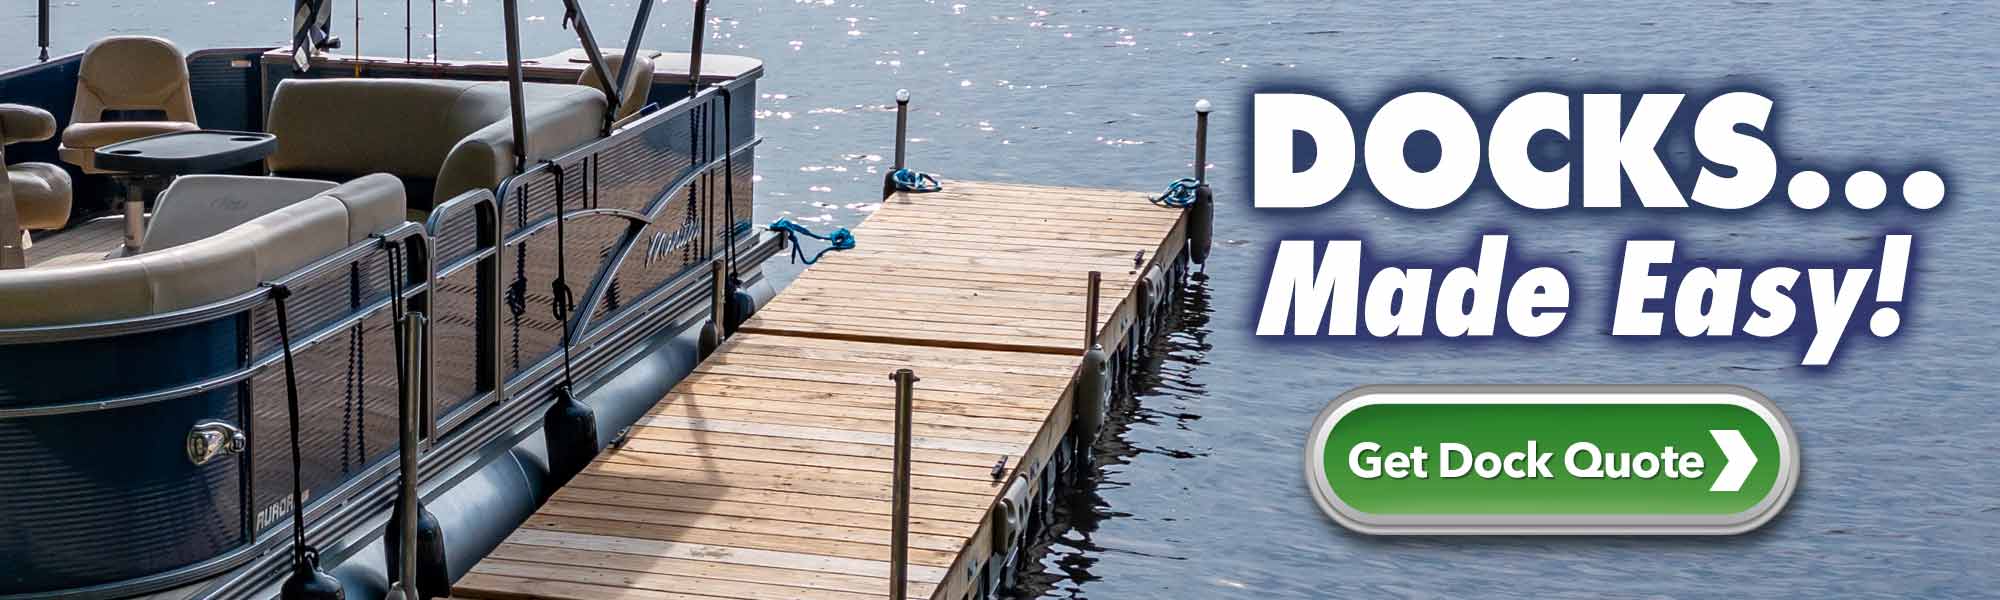 Dock Request A Quote